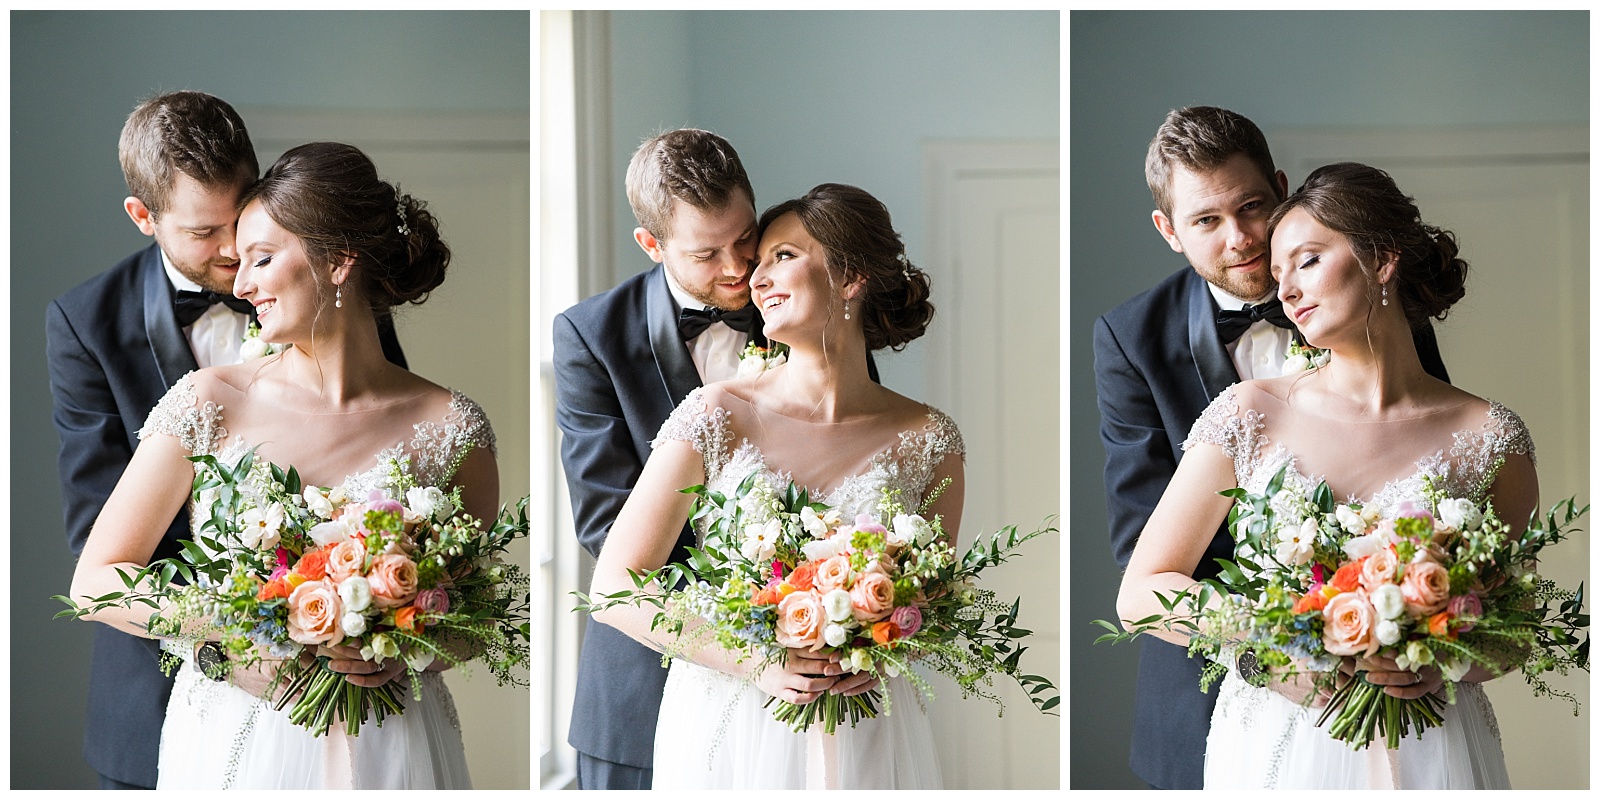 bride and groom couples portraits in historic nc venue with huge bridal bouquet by Jenn Eddine Photography